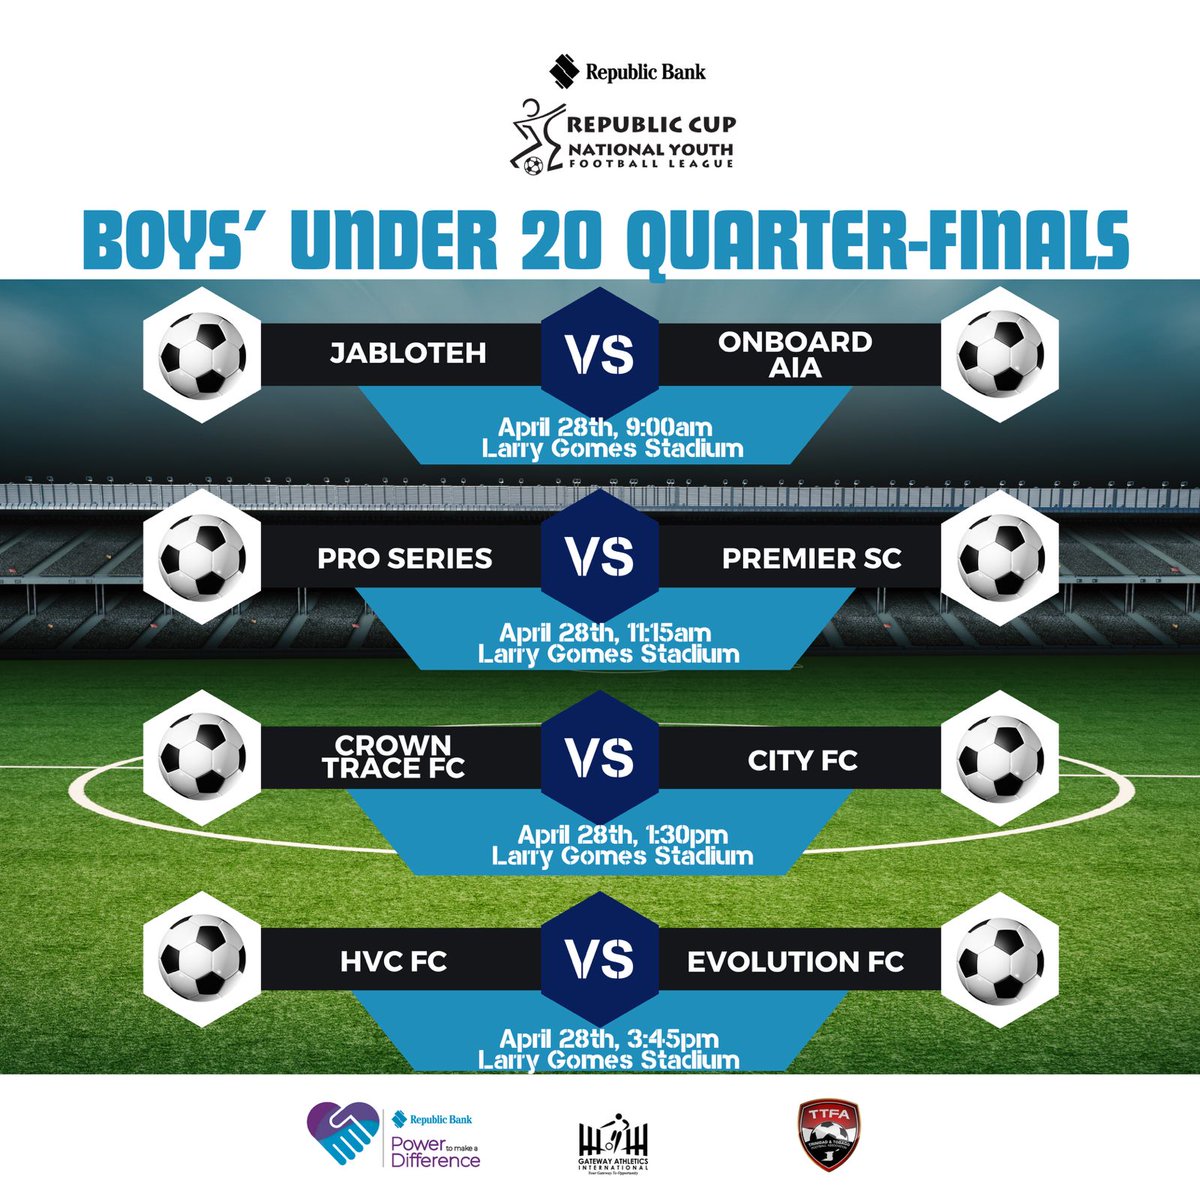 Momentum is building and we're excited to see how the quarter final matches of the Republic Cup National Youth Football League will play out! Come out this weekend to support our future football stars as they aim to go from #GrassrootsToGreatness
#RBLInFootball
#RepublicCup
#PMAD